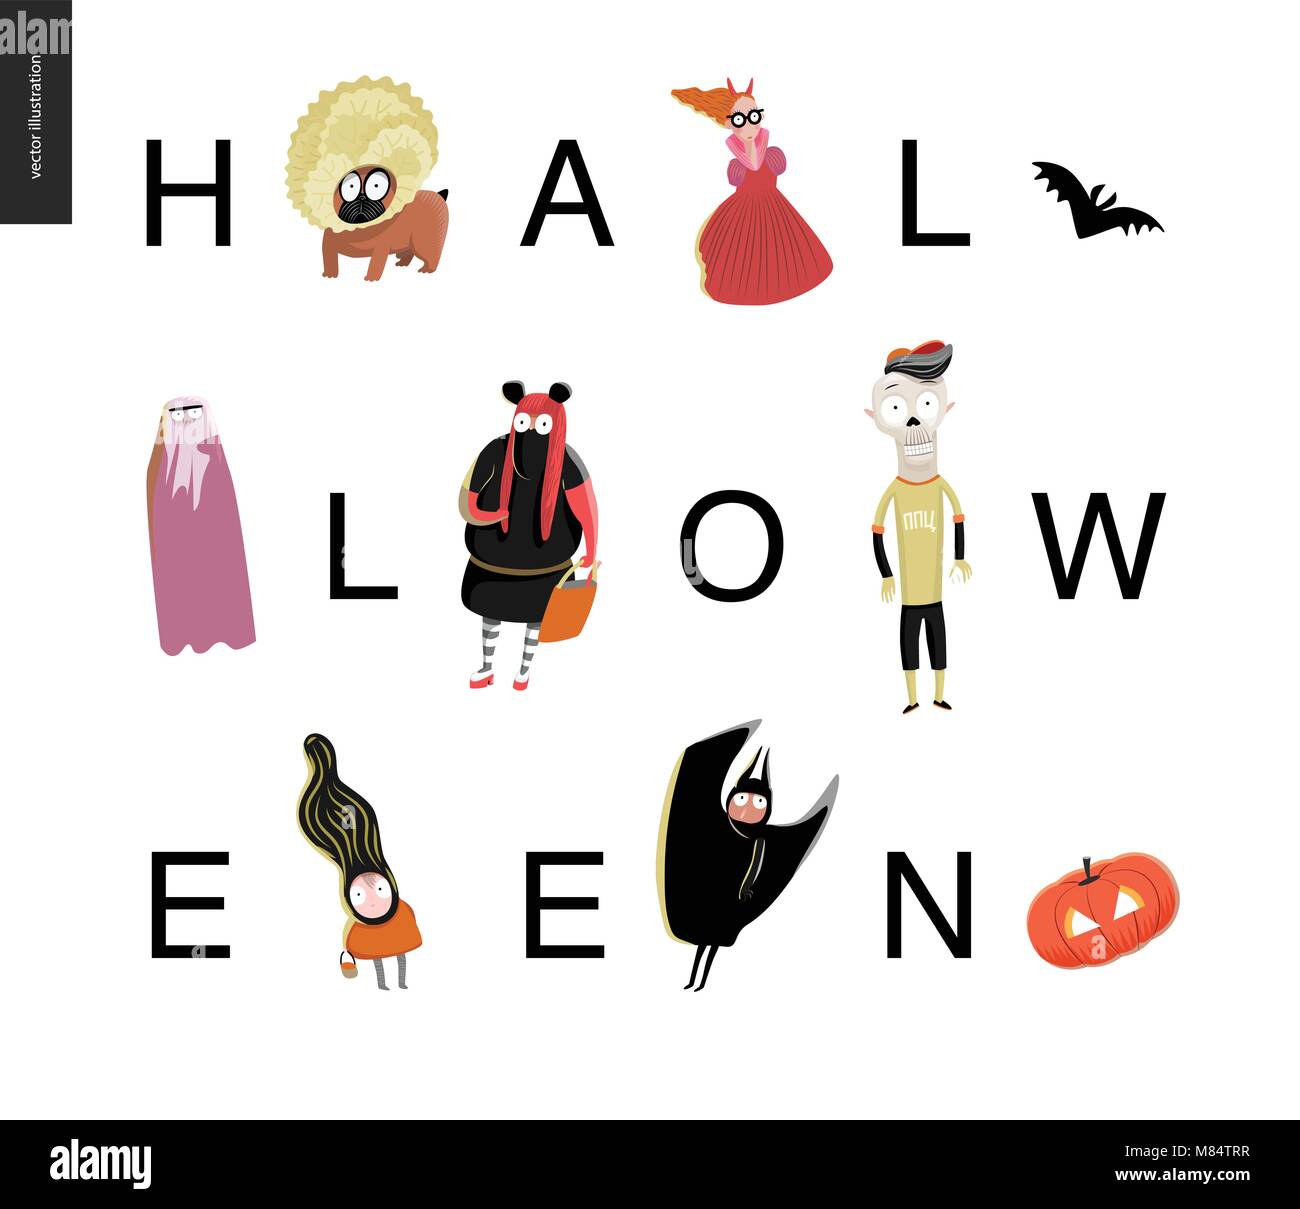 Halloween lettering card. Vector cartoon illustrated kids wearing Halloween costumes and a french bulldog, with letters composing a word Halloween. Co Stock Vector